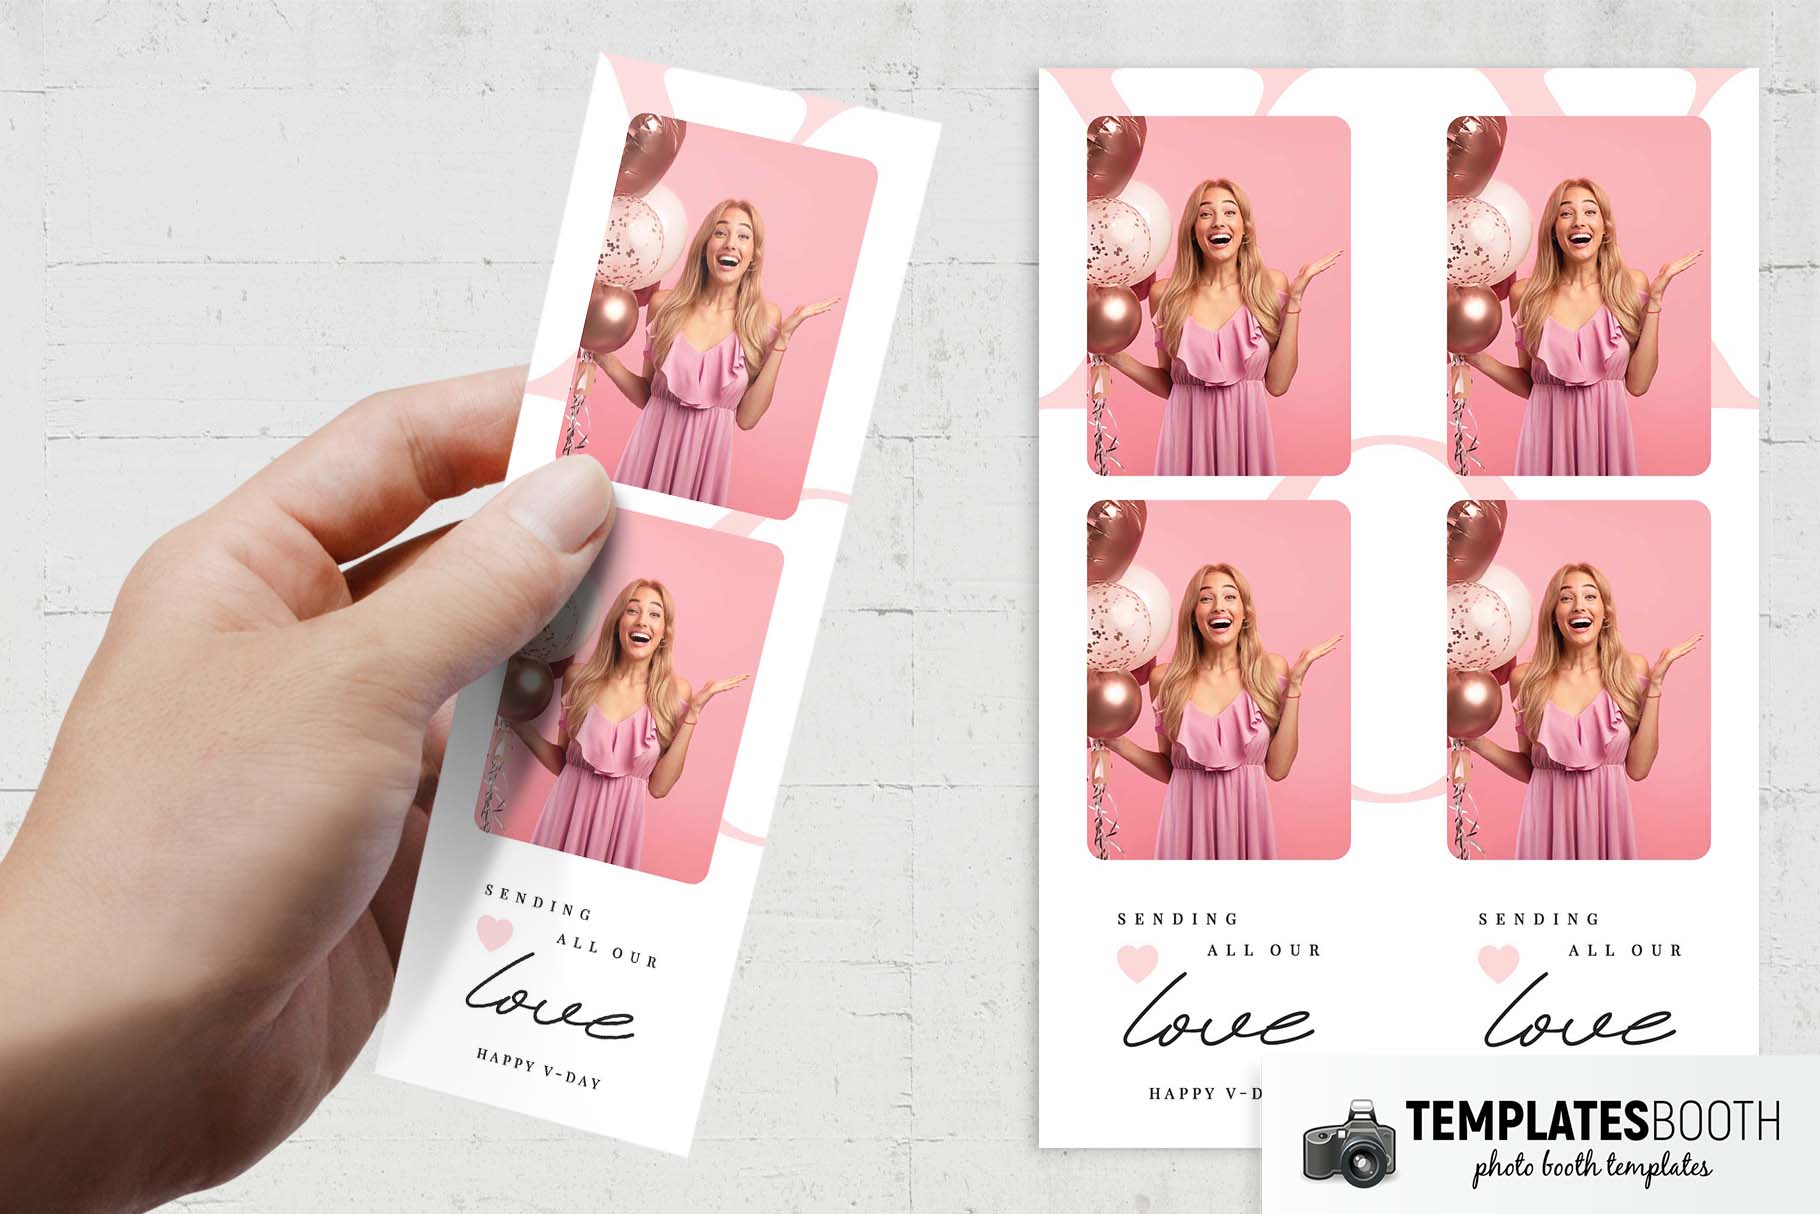 XOXO Valentines Day Photo Booth Template